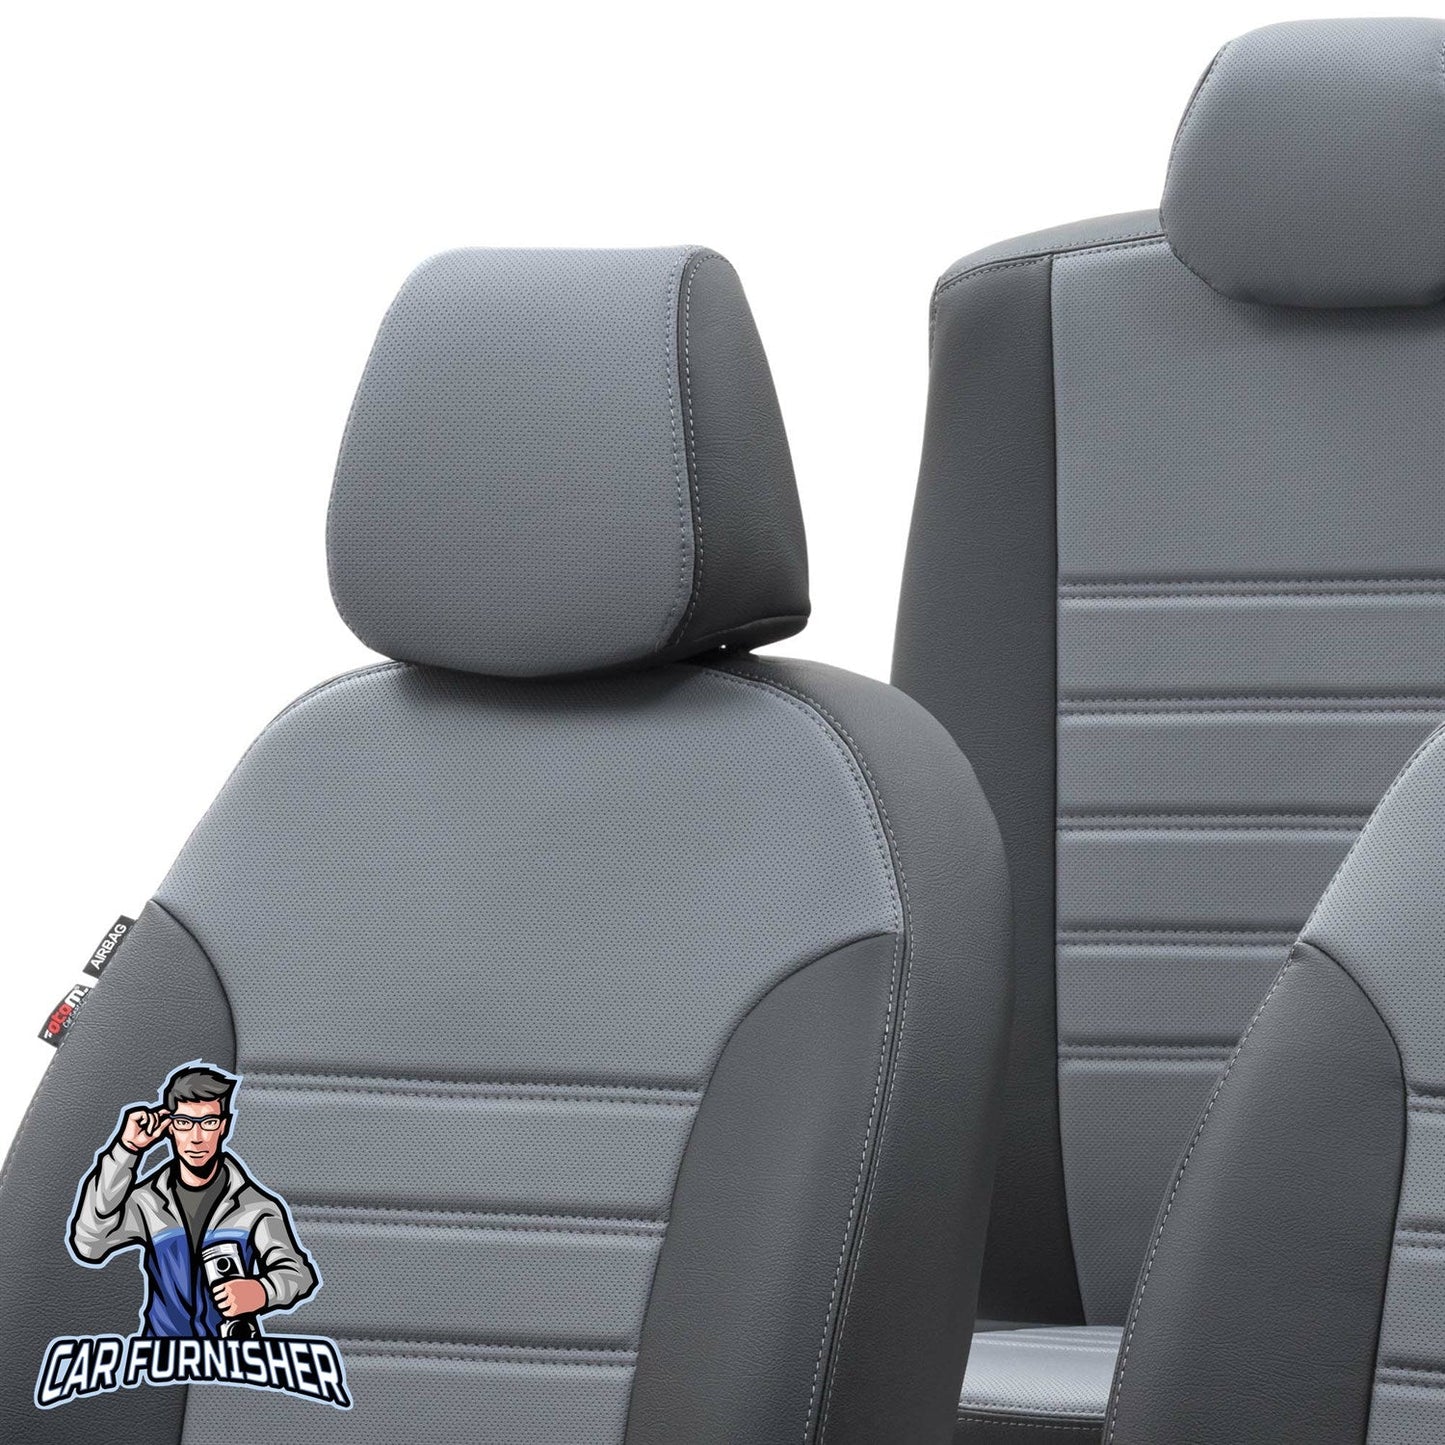 Man TGE Seat Covers Istanbul Leather Design Smoked Black Leather